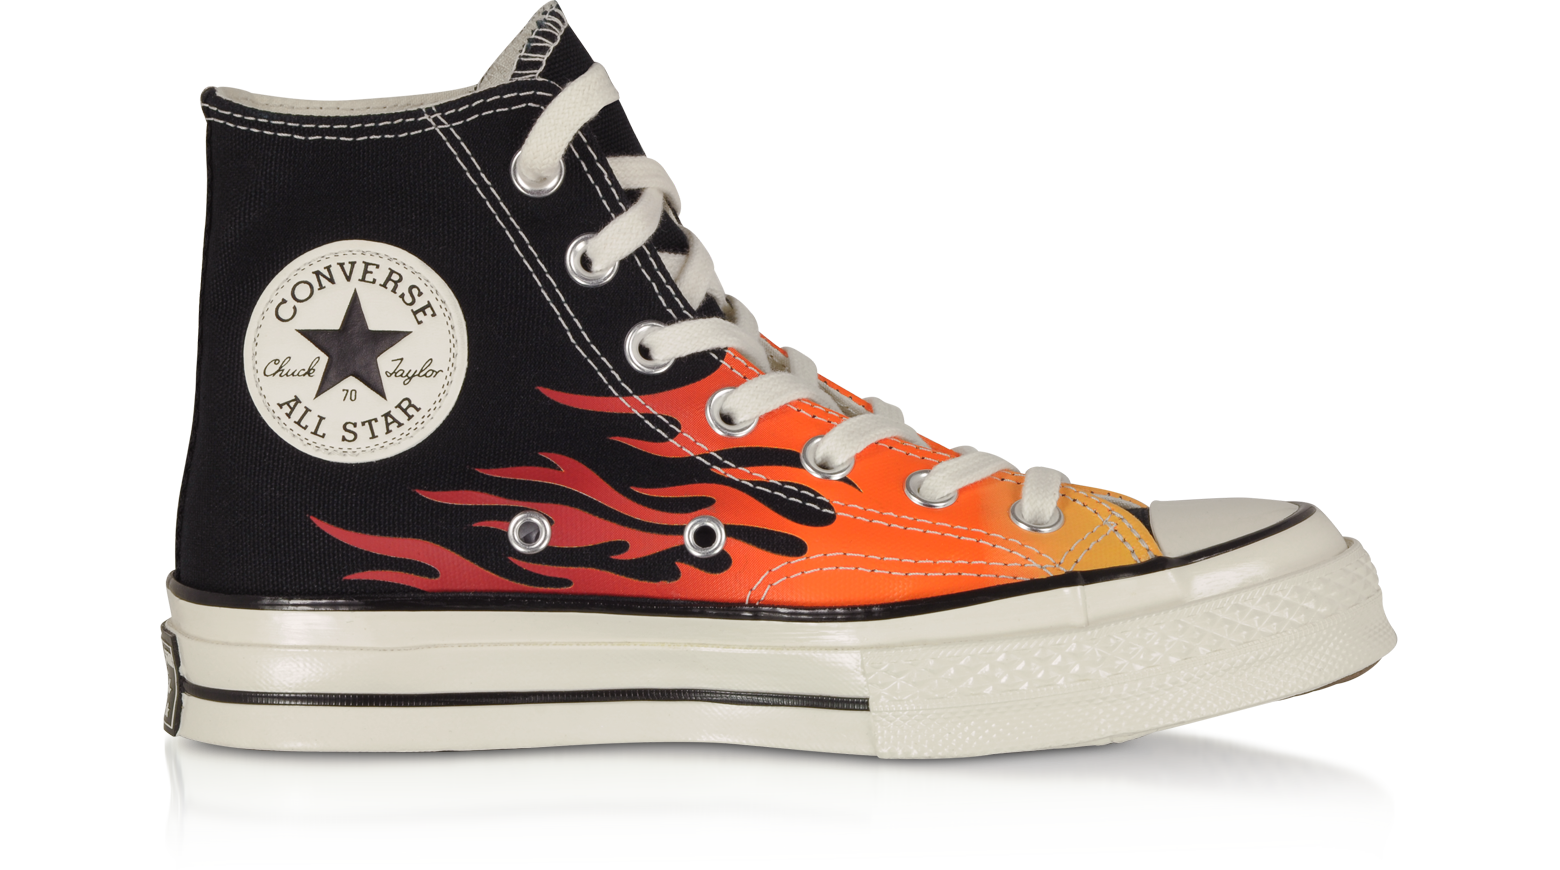 converse limited edition